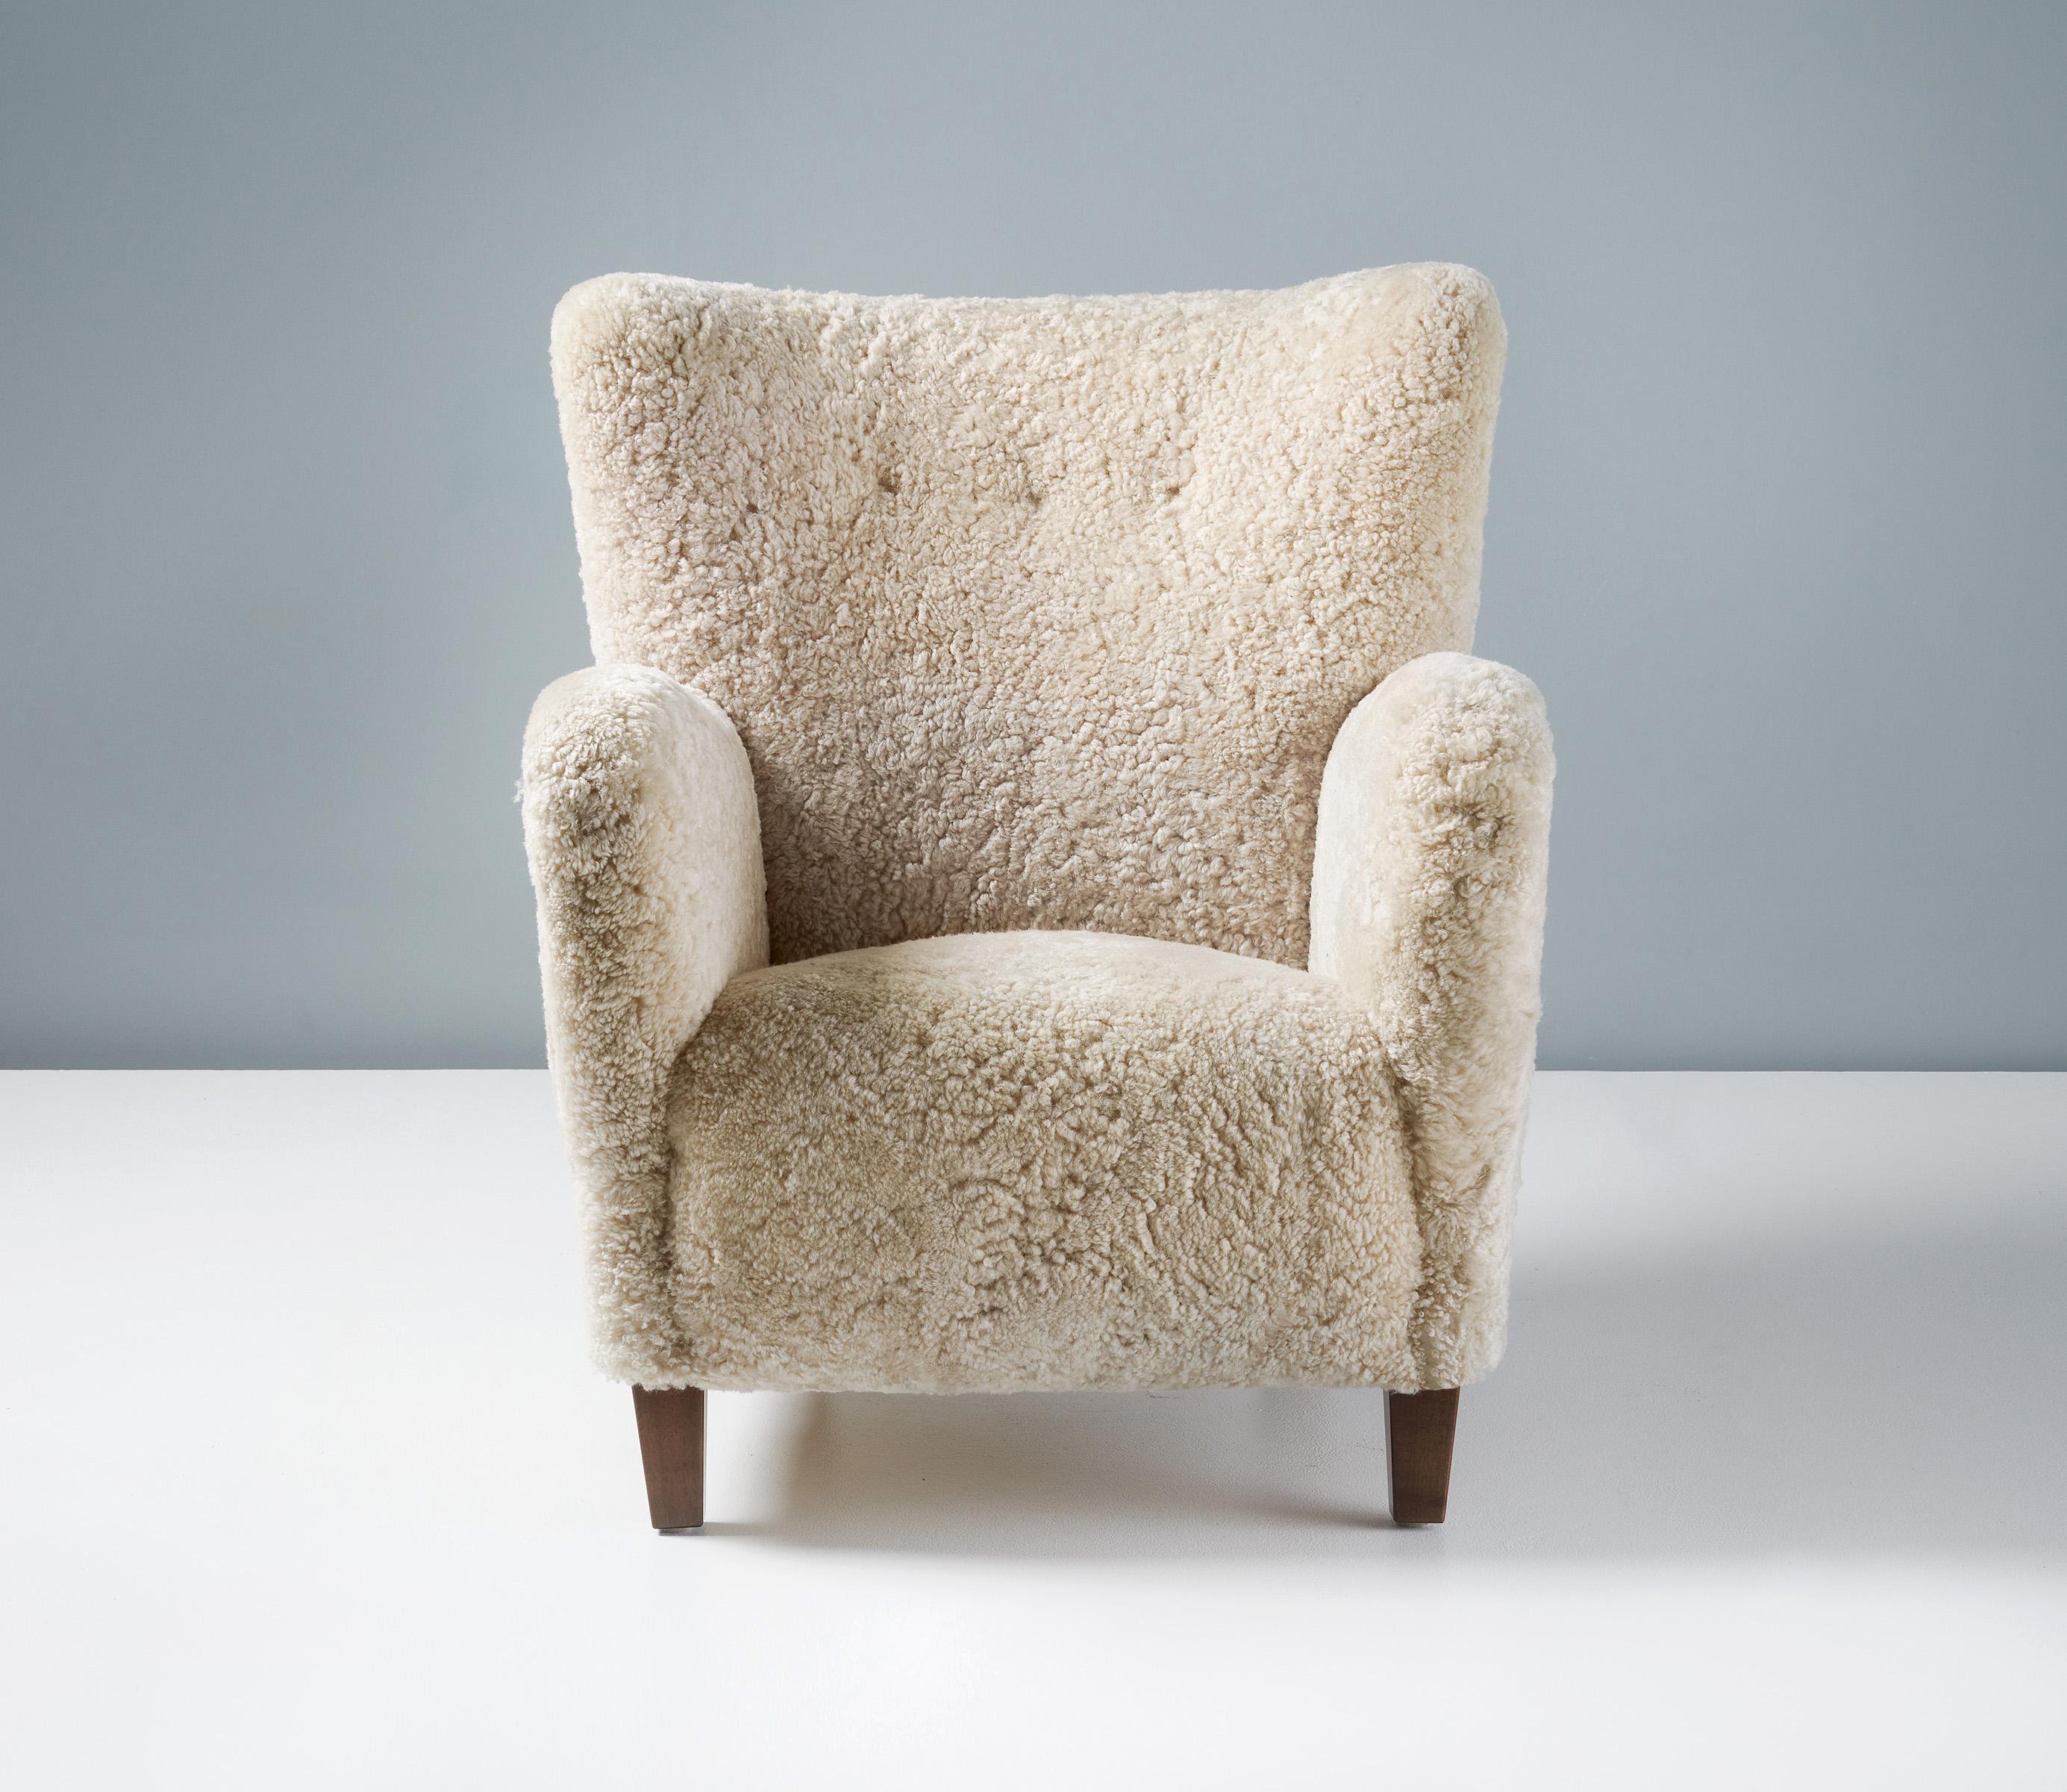 Danish Cabinetmaker Sheepskin Lounge chair, circa 1940s.

Lounge chair in the manner of Fritz Hansen produced in Denmark in the 1940s, featuring wonderfully curved arms and back and taper beech wood legs. The chair has been reupholstered in